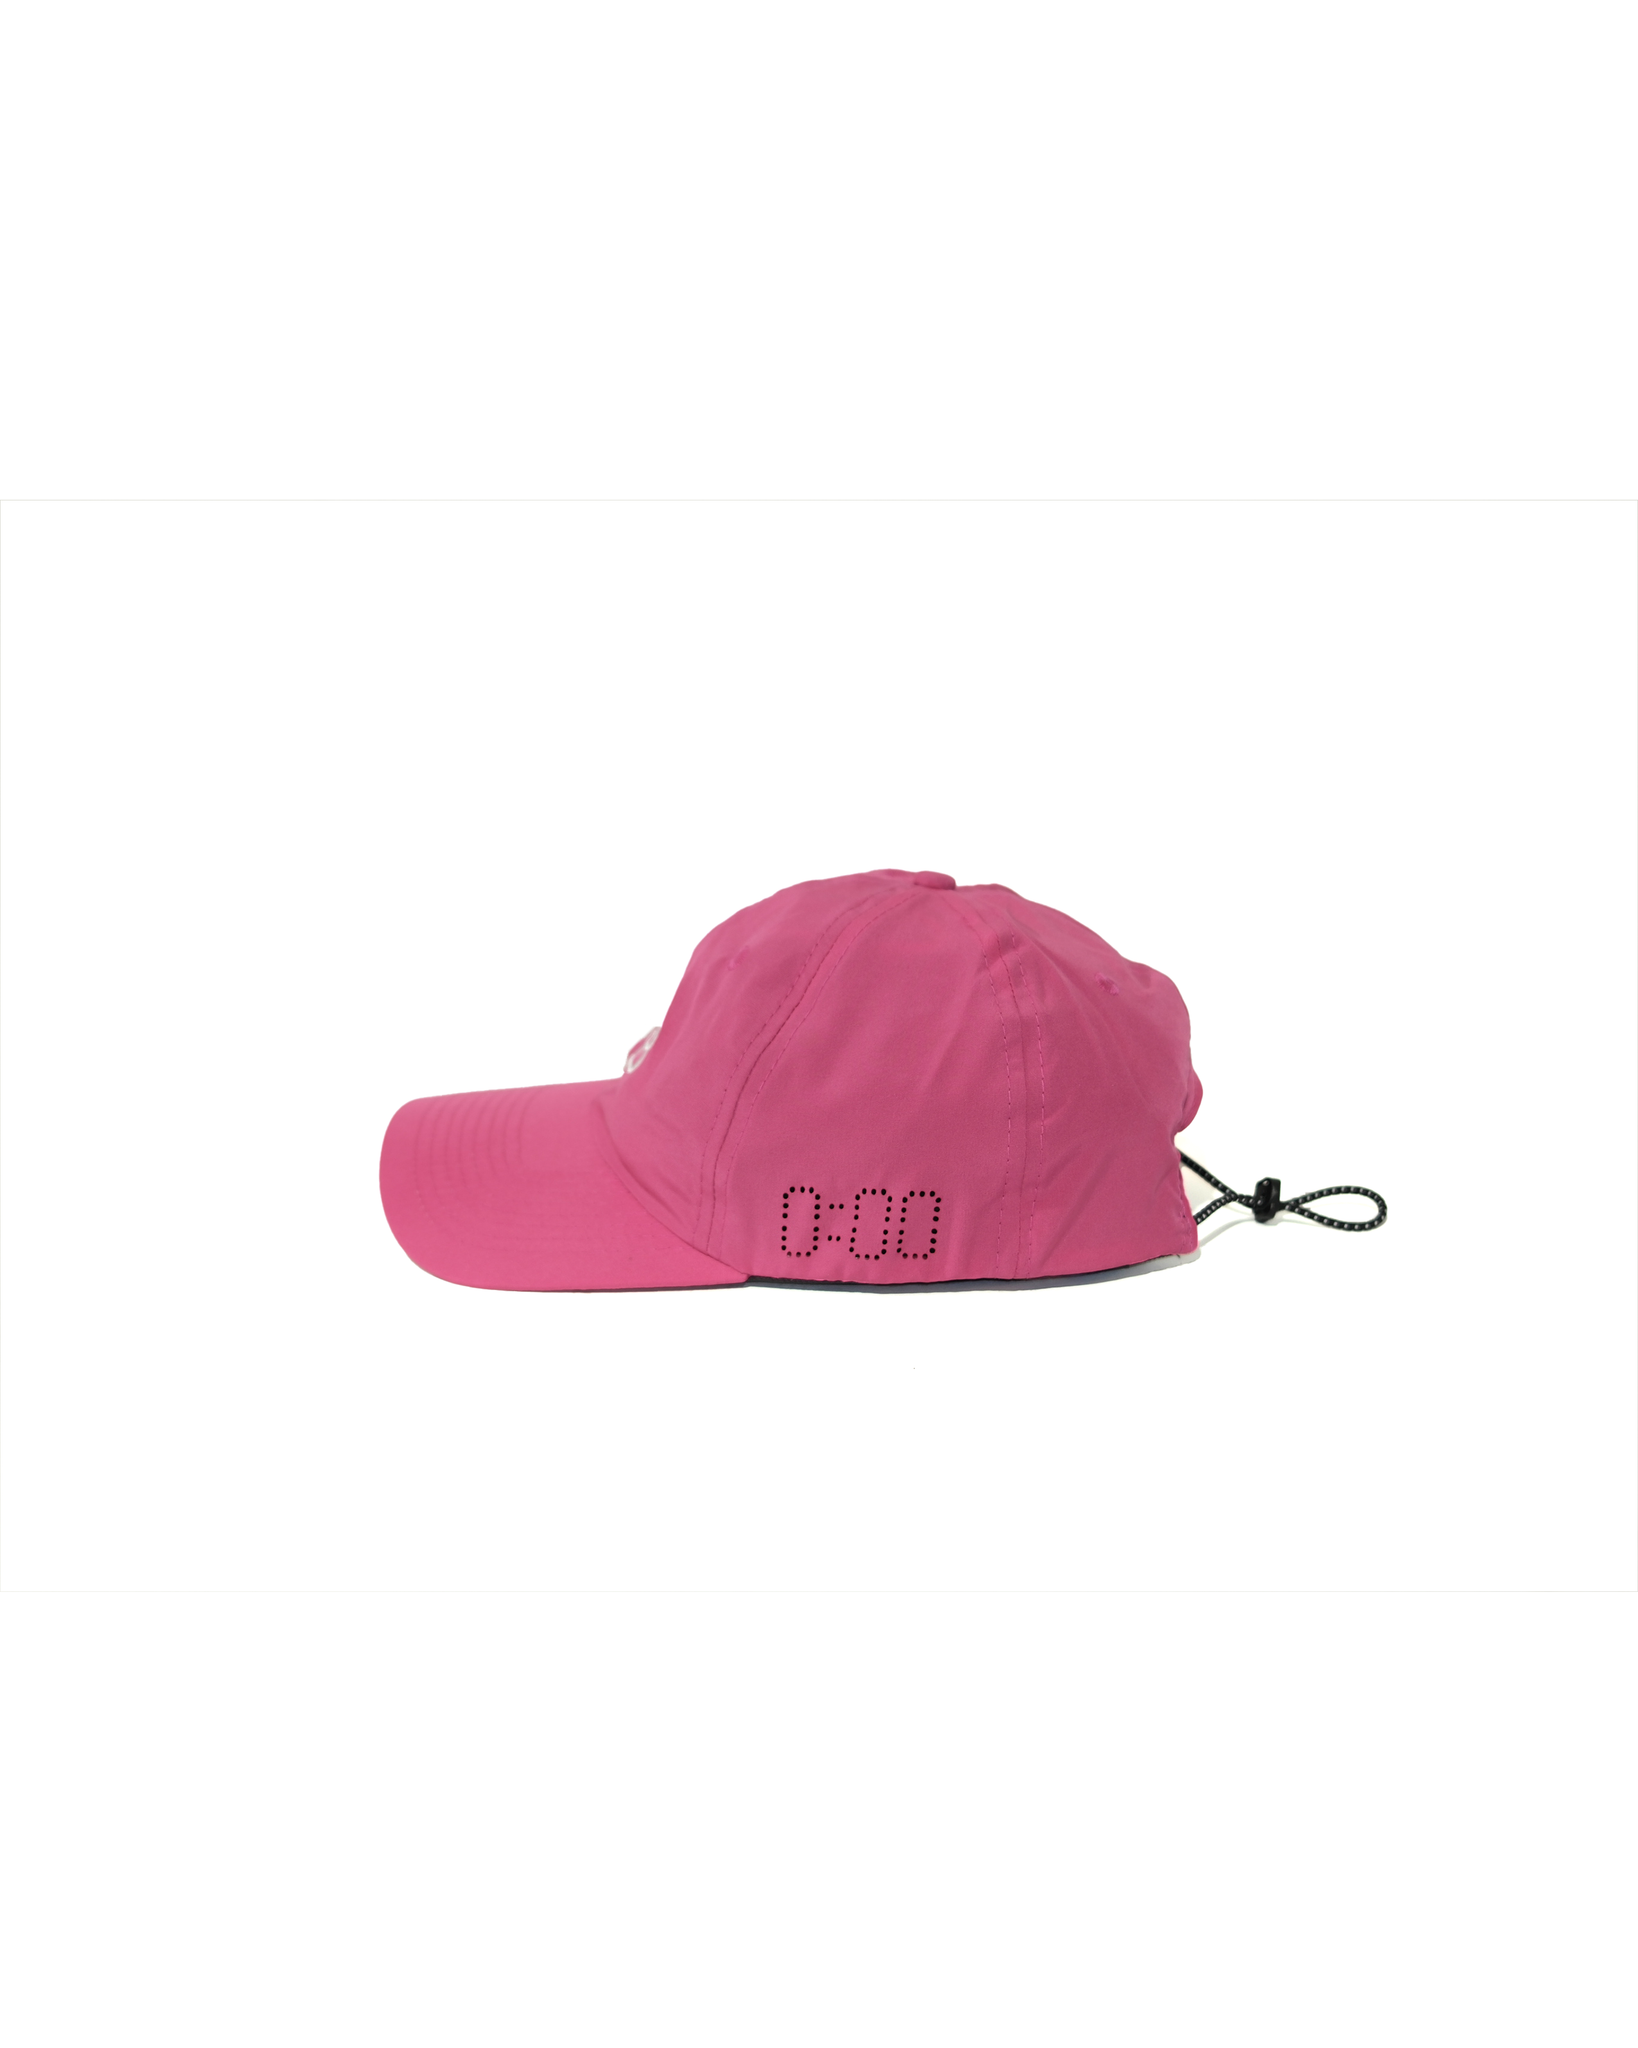 Cab Active Running Hat Pink